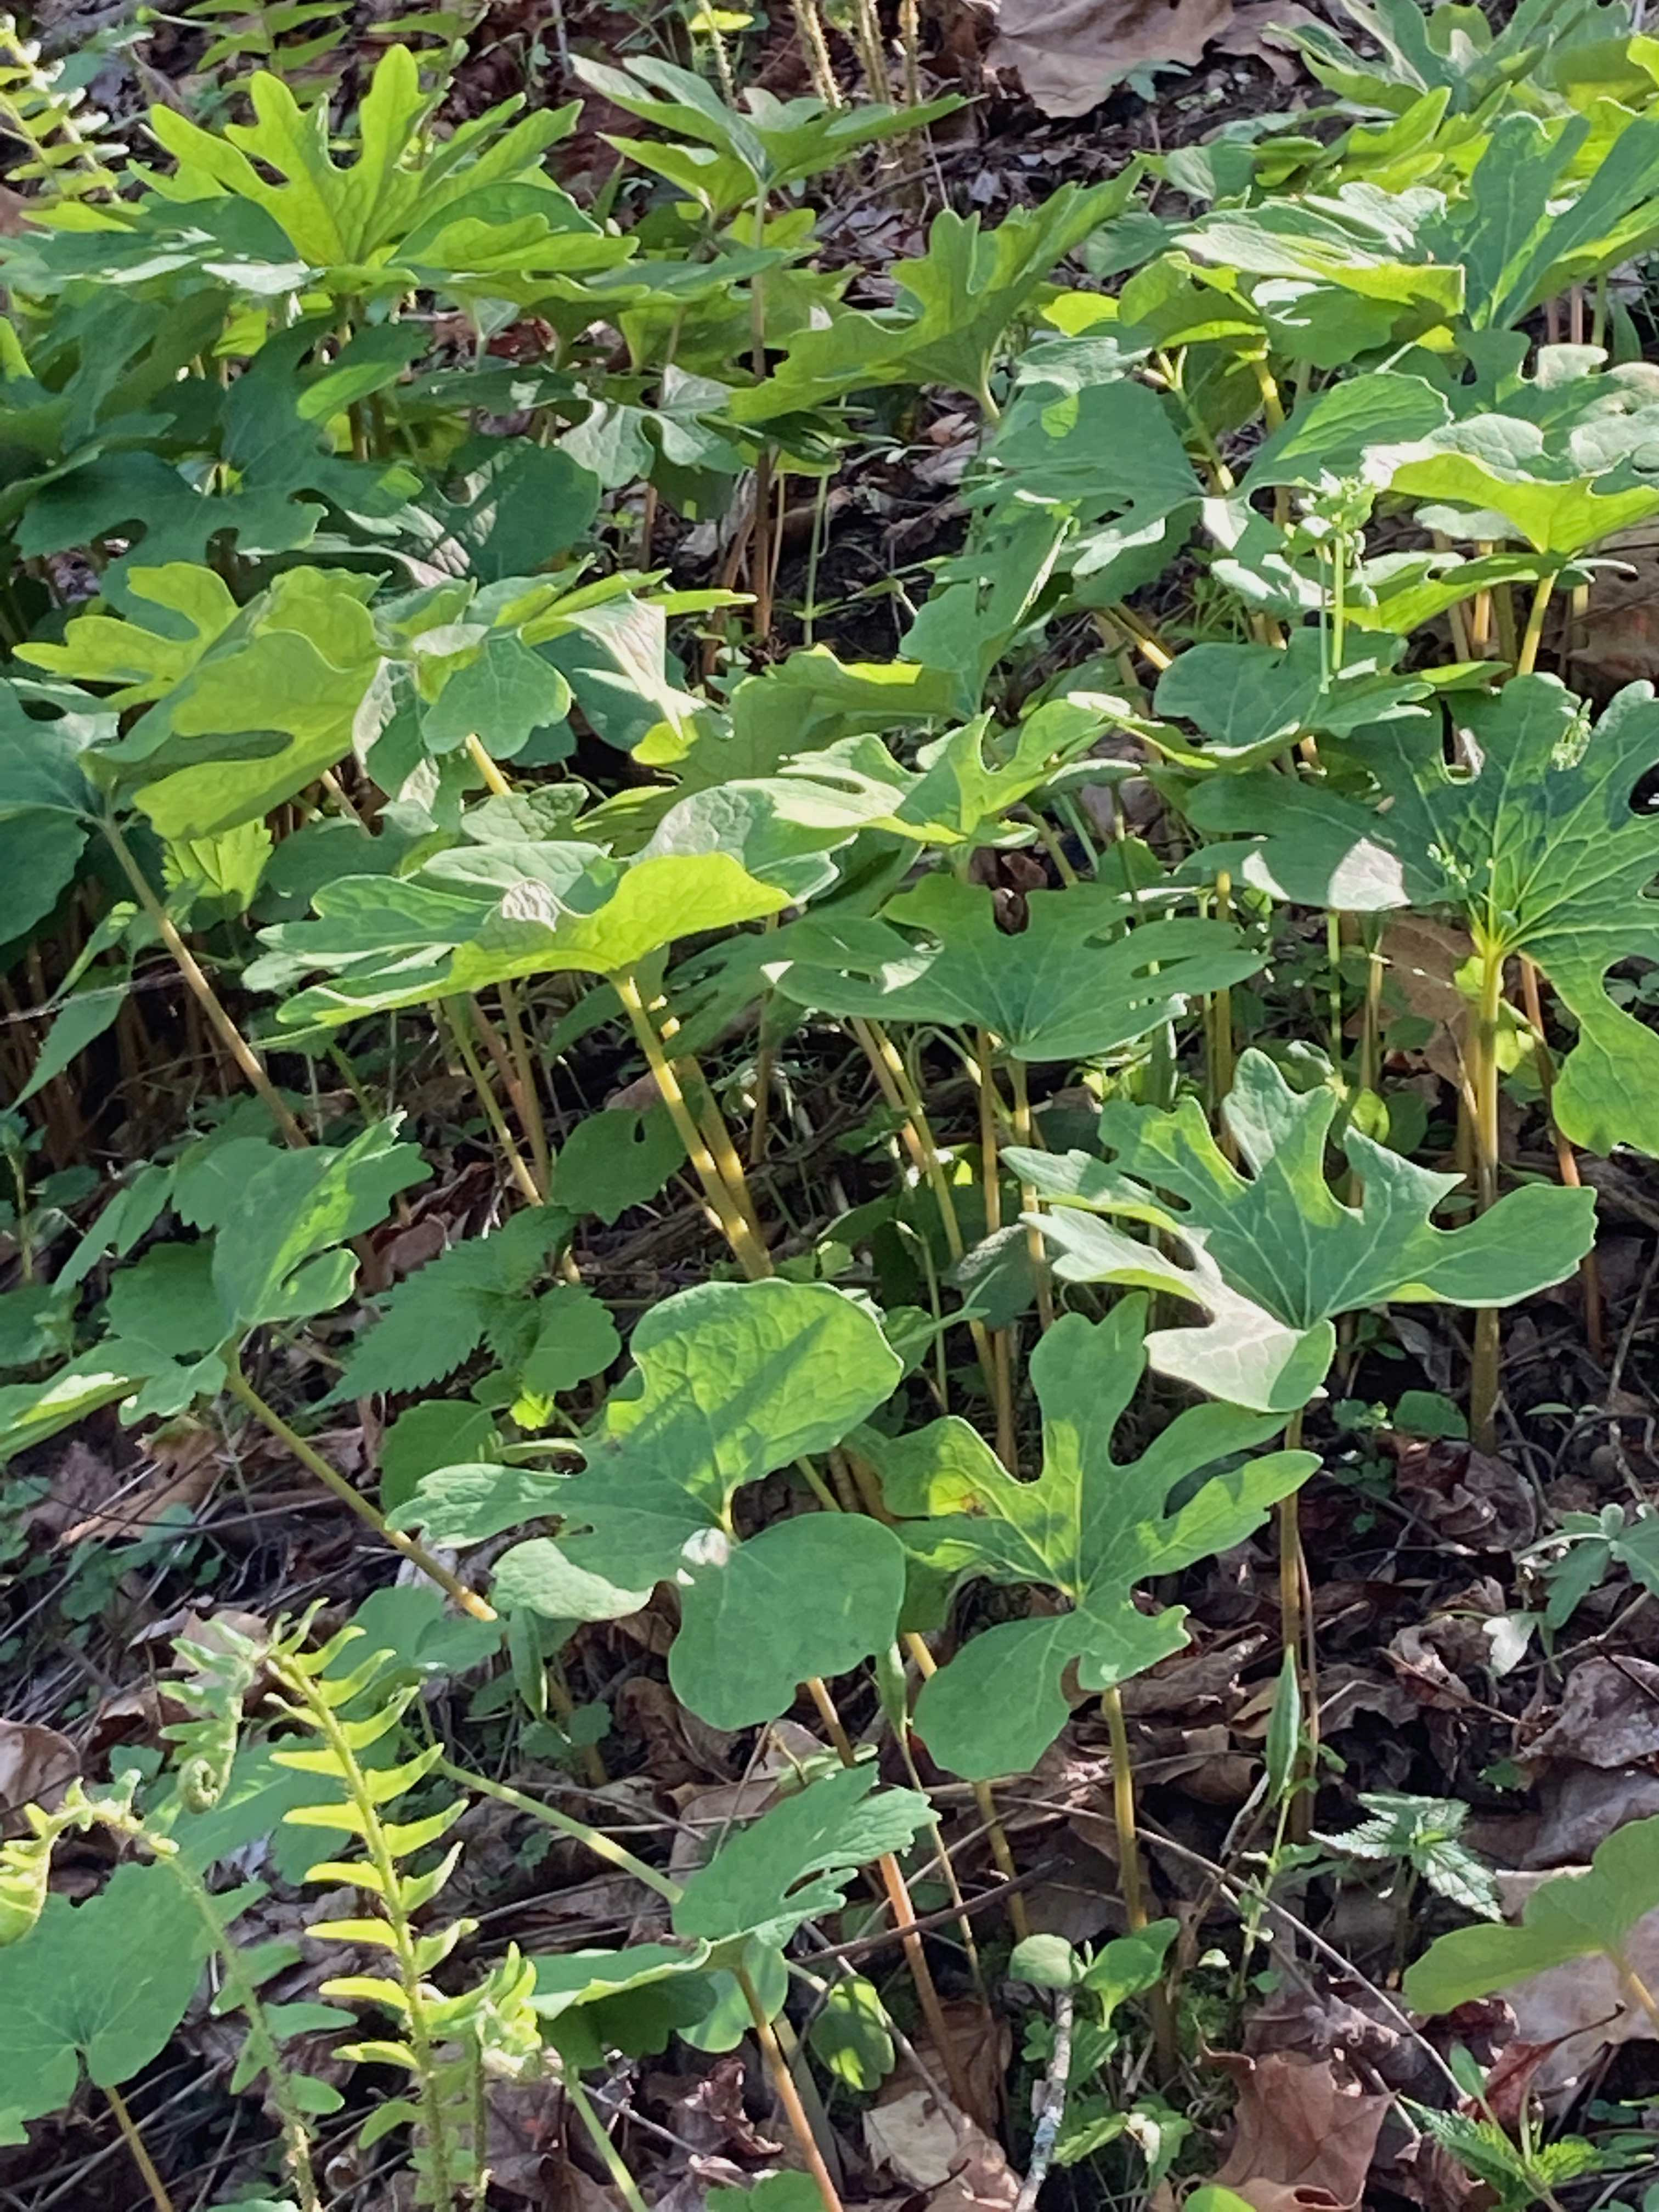 The Scientific Name is Sanguinaria canadensis. You will likely hear them called Bloodroot, Red Puccoon. This picture shows the A large patch. of Sanguinaria canadensis